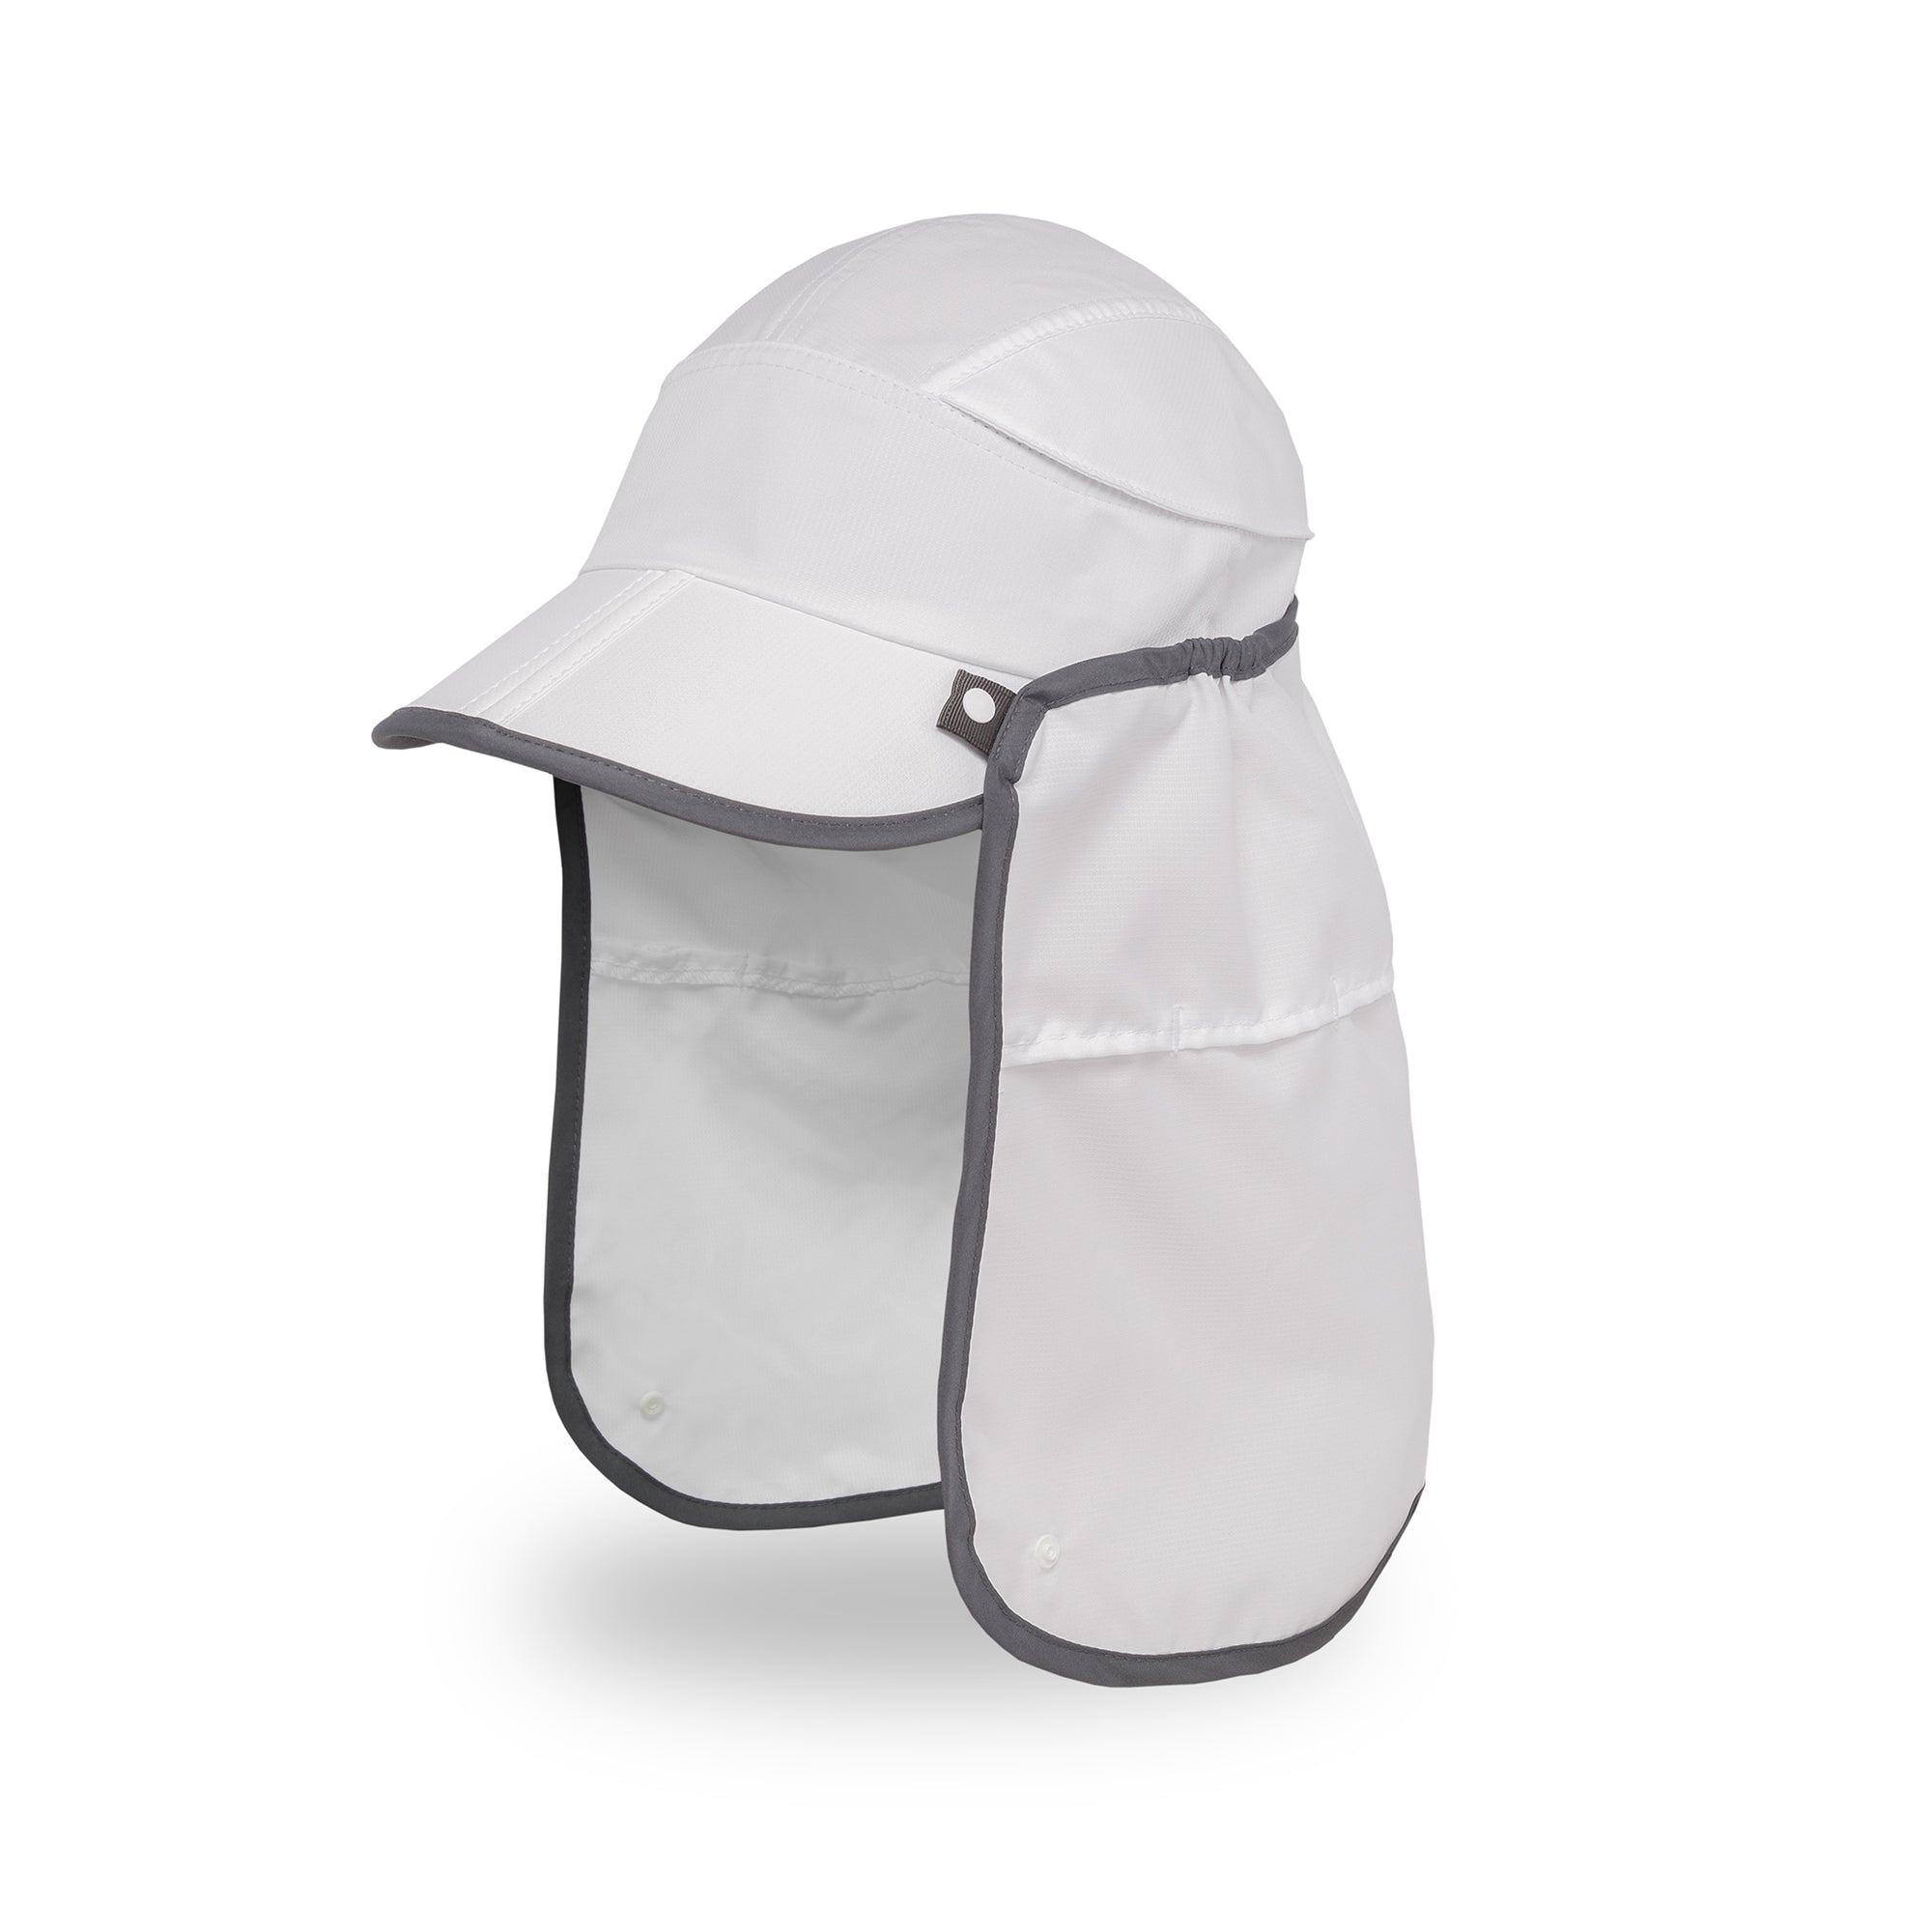 sunday afternoons sun guide cap in white